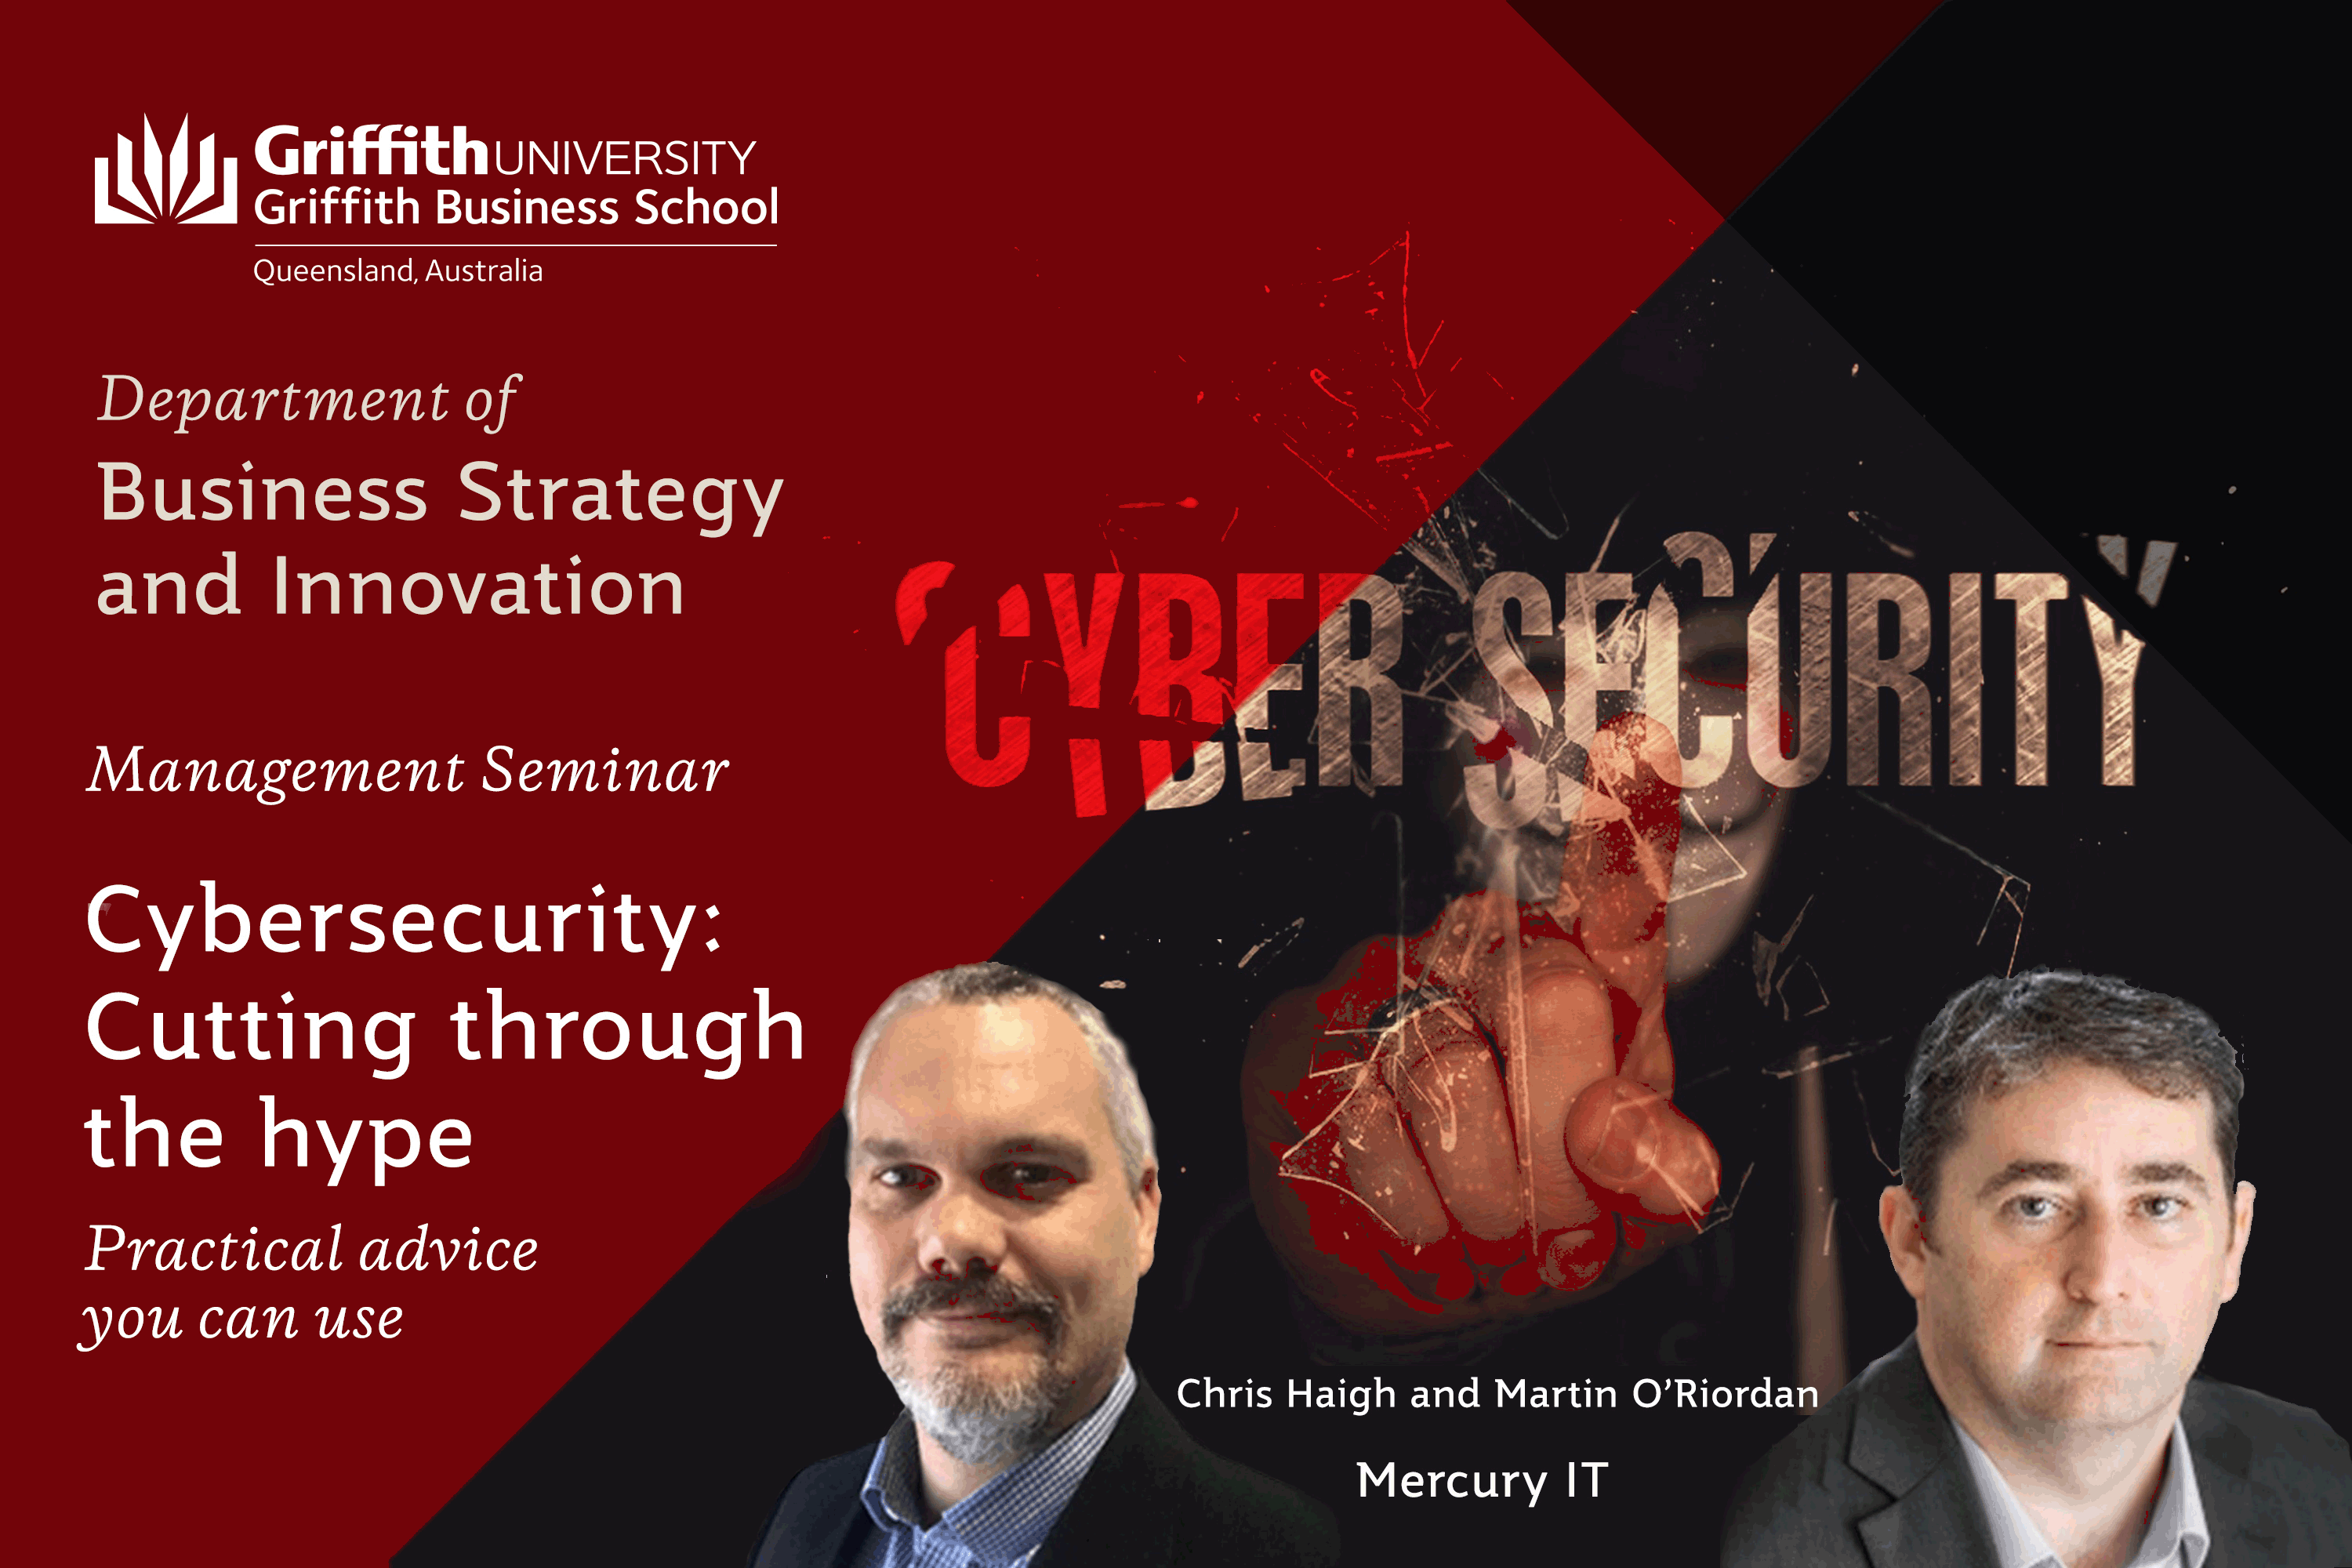 BSI management seminar: Cybersecurity: Cutting through the hype